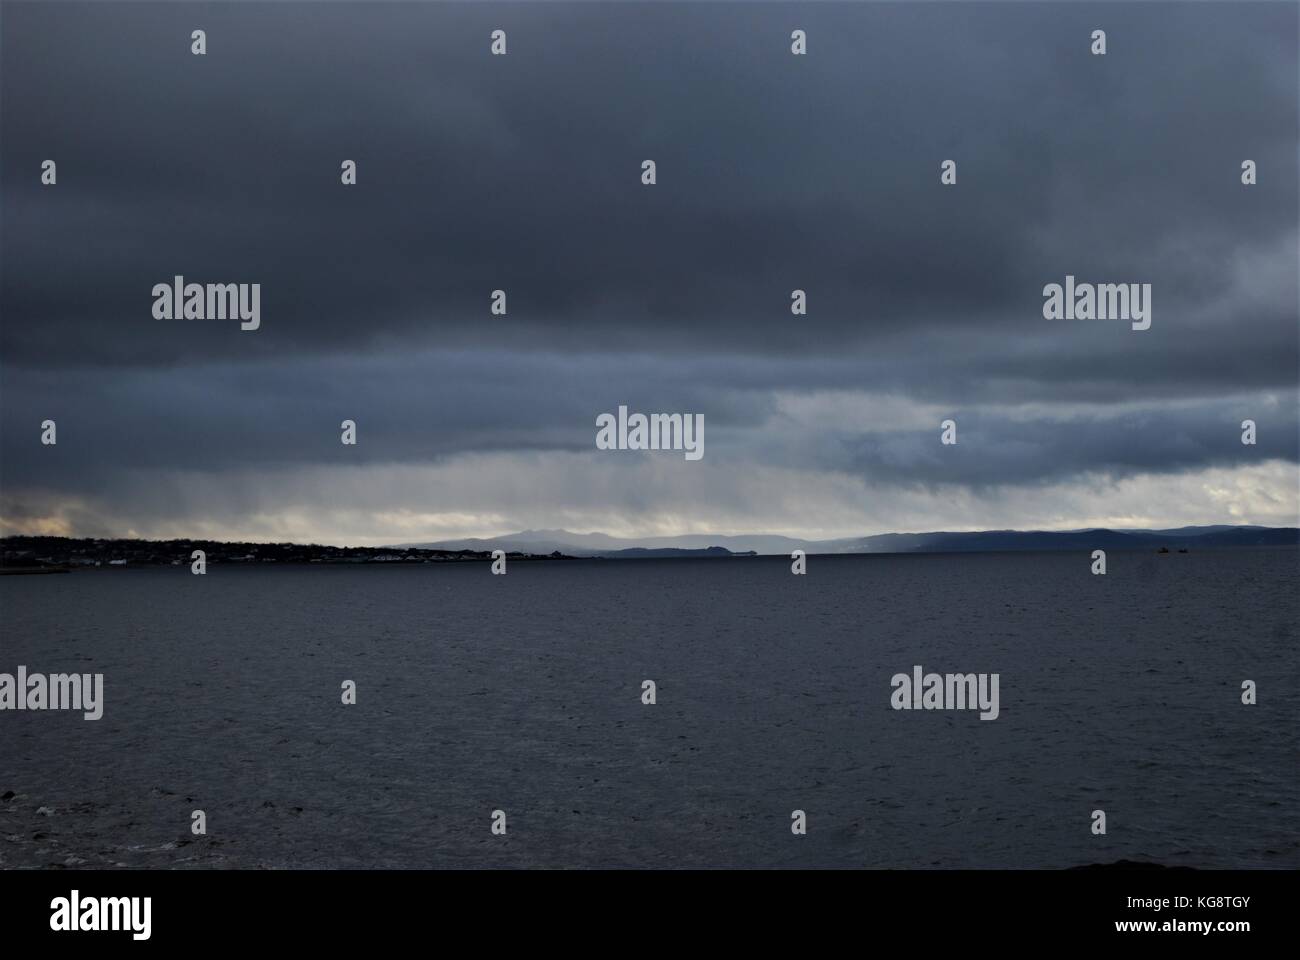 Storm Clouds gathering over the bay, Conception Bay, Newfoundland. Looking from Conception Bay south across the water to Conception Bay North. Stock Photo